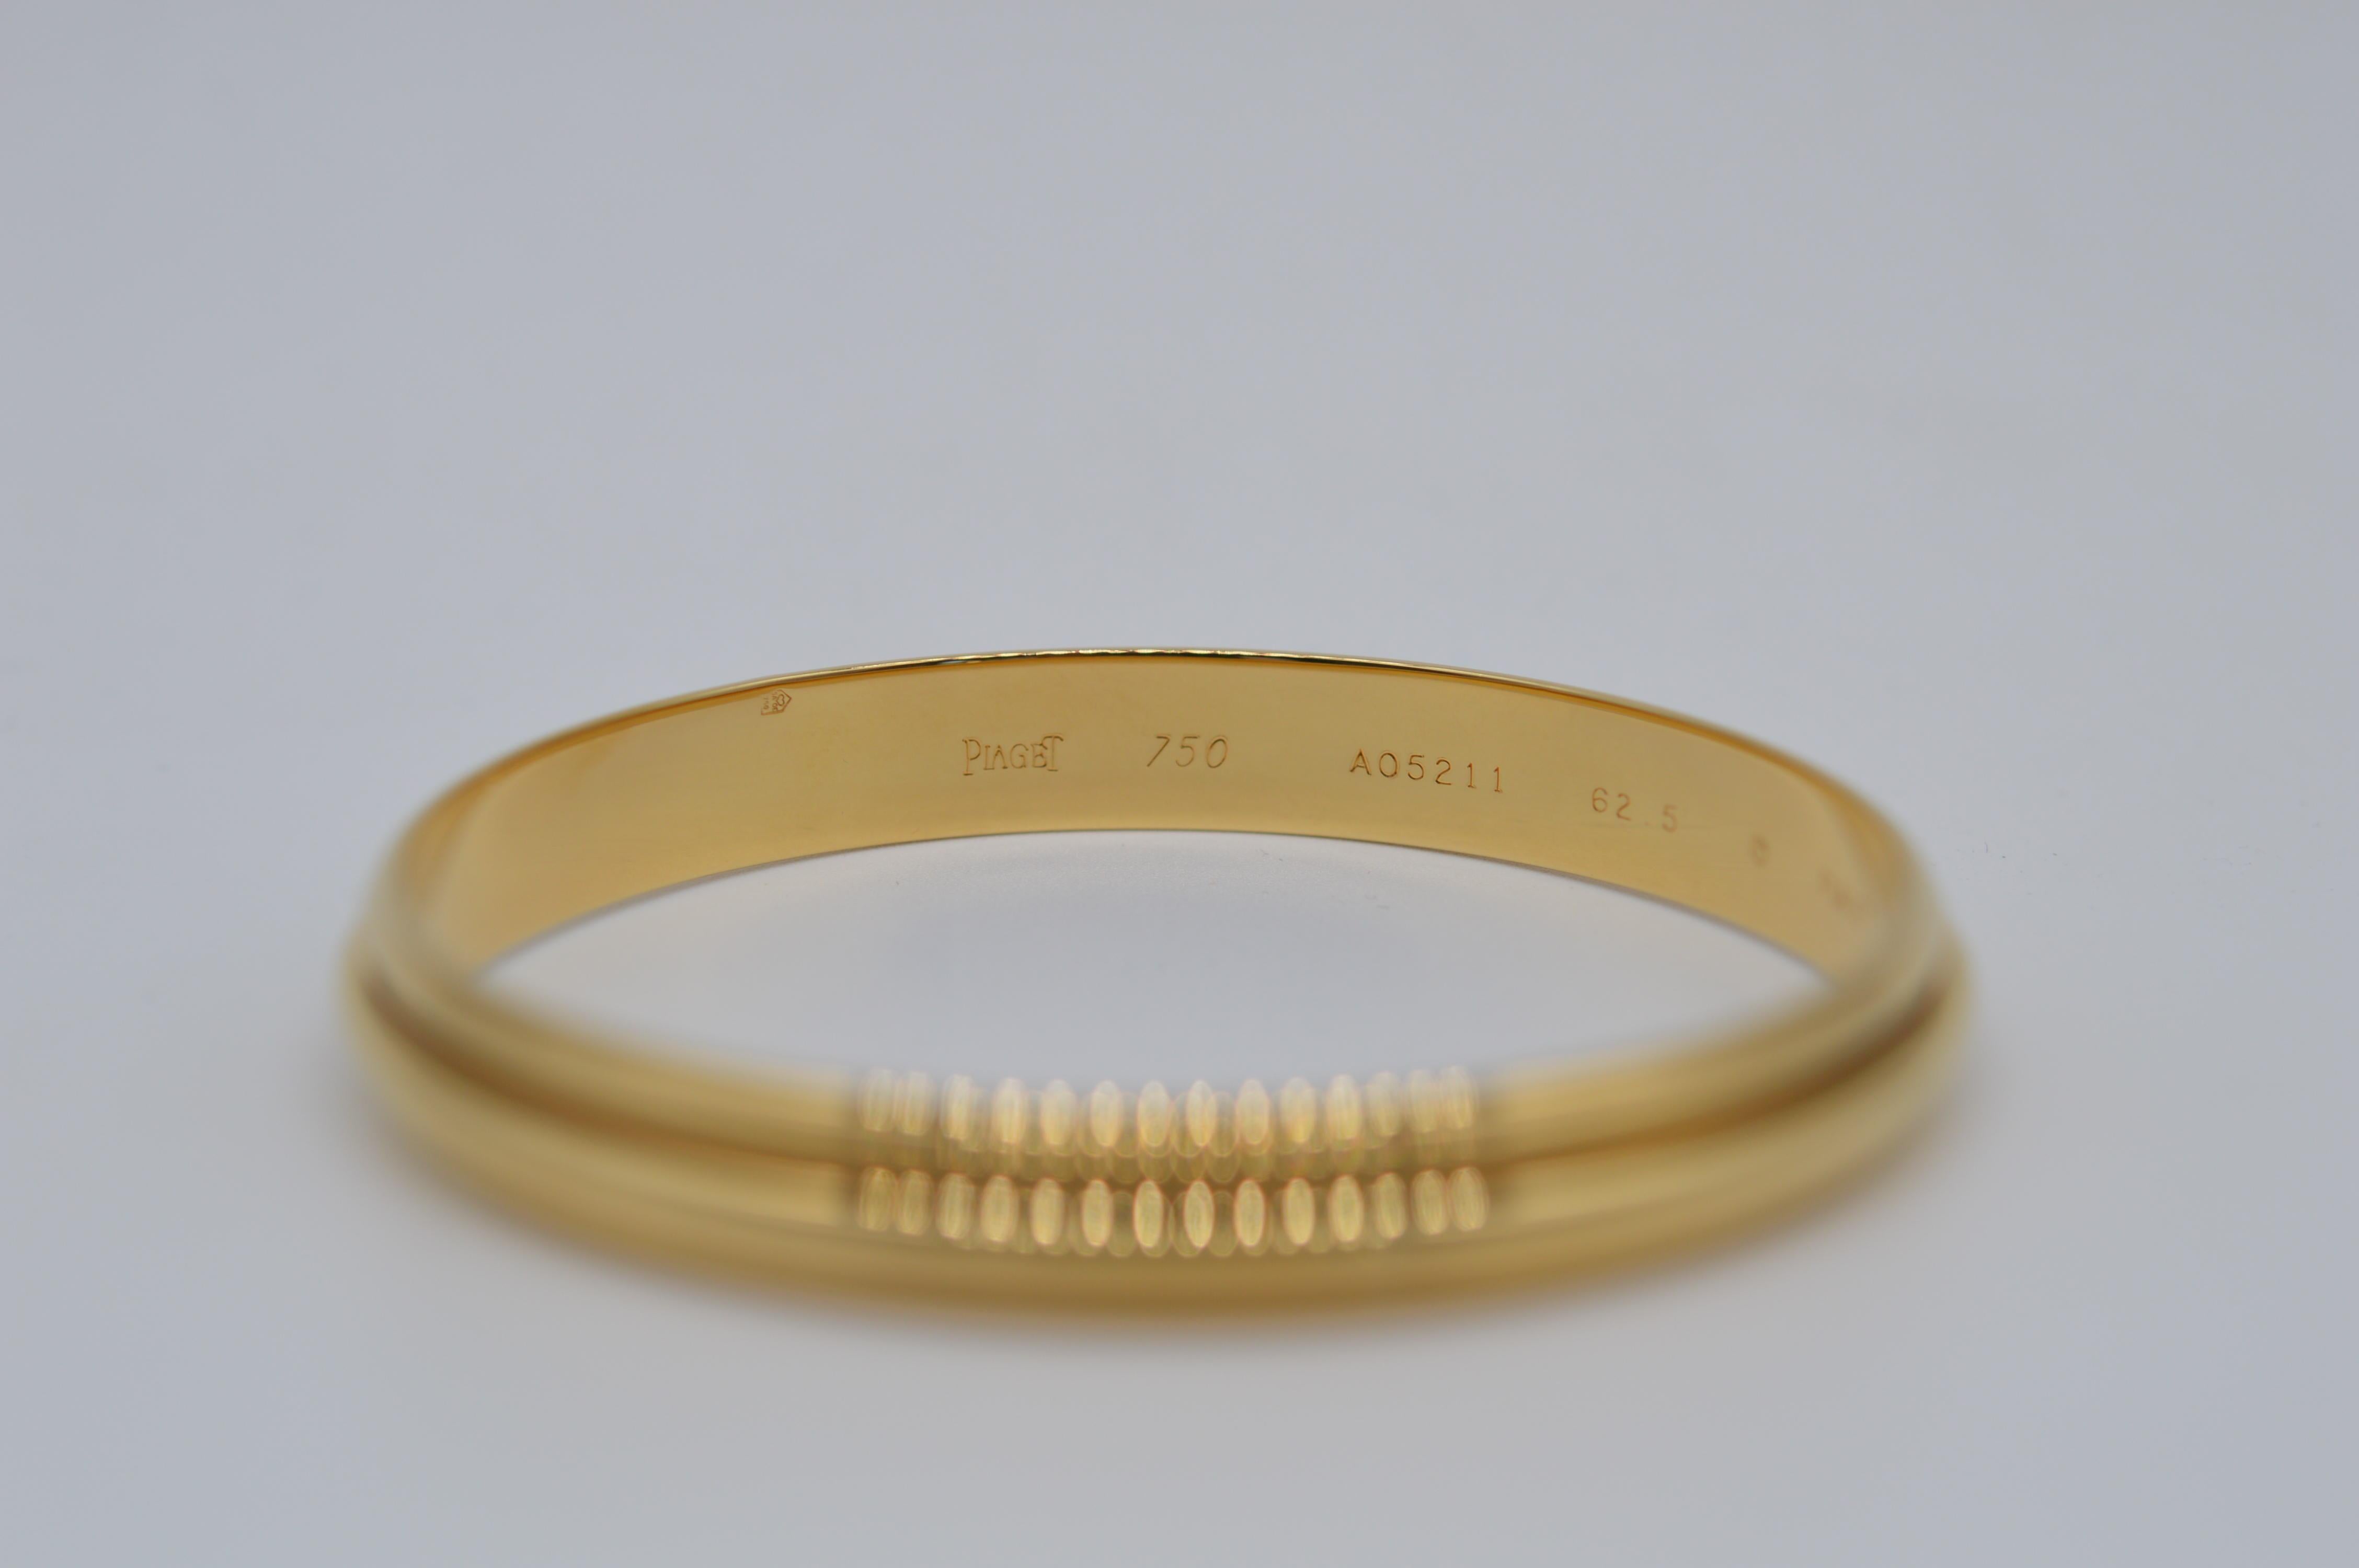 Piaget Possession Bangle Unworn
Size 62.5
18K Yellow Gold
Spinning bangle
Weight 48.5 grams
Vintage unworn
From 1990